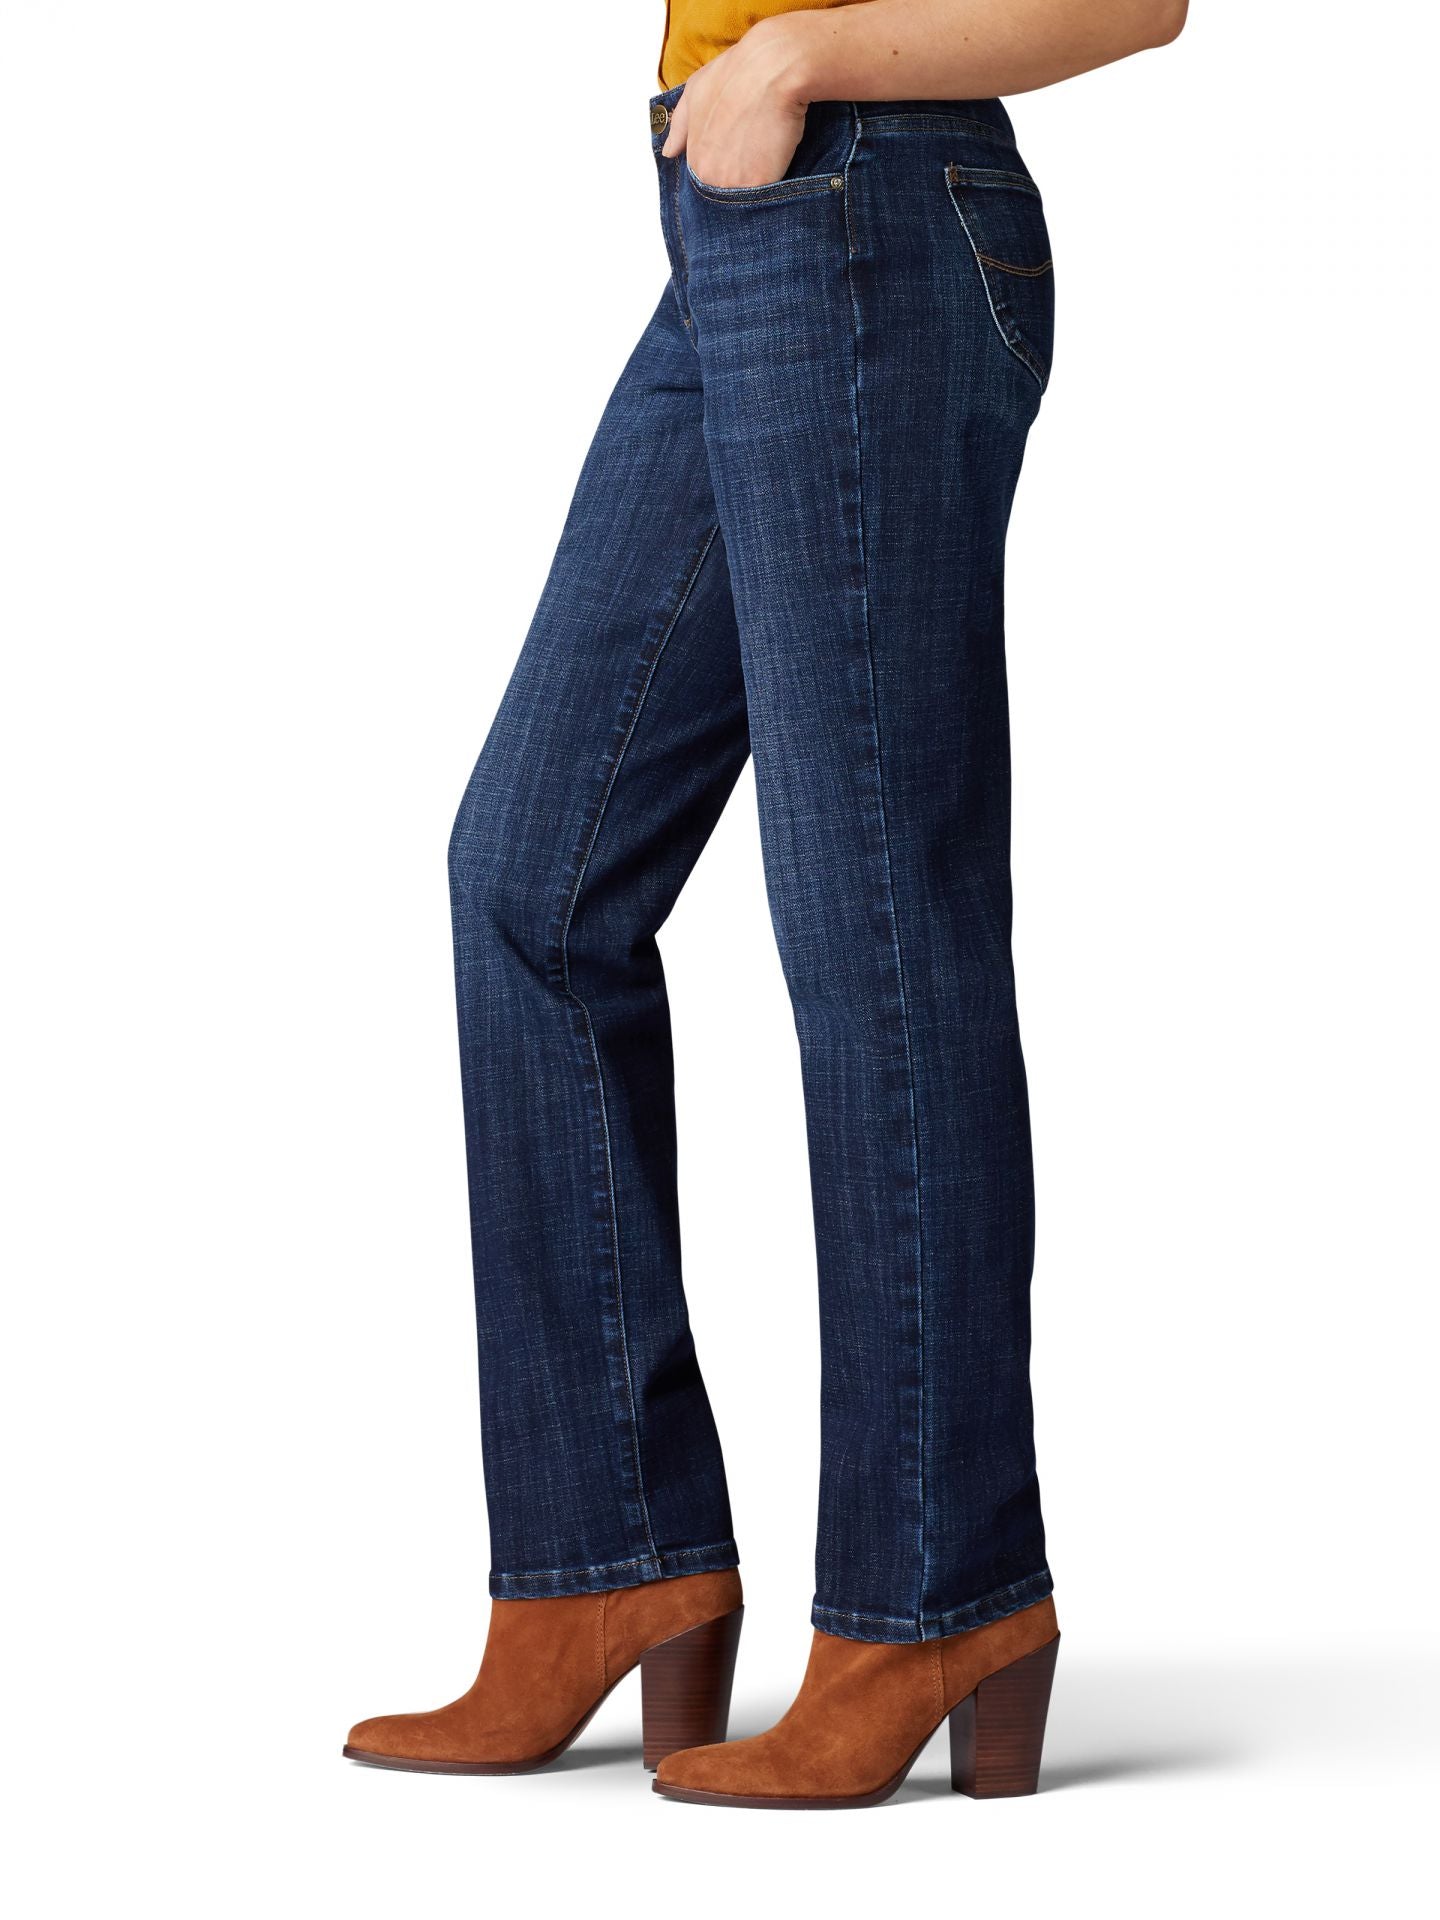 Women's Stretch Relaxed Fit Straight Leg Jeans - Bewitched